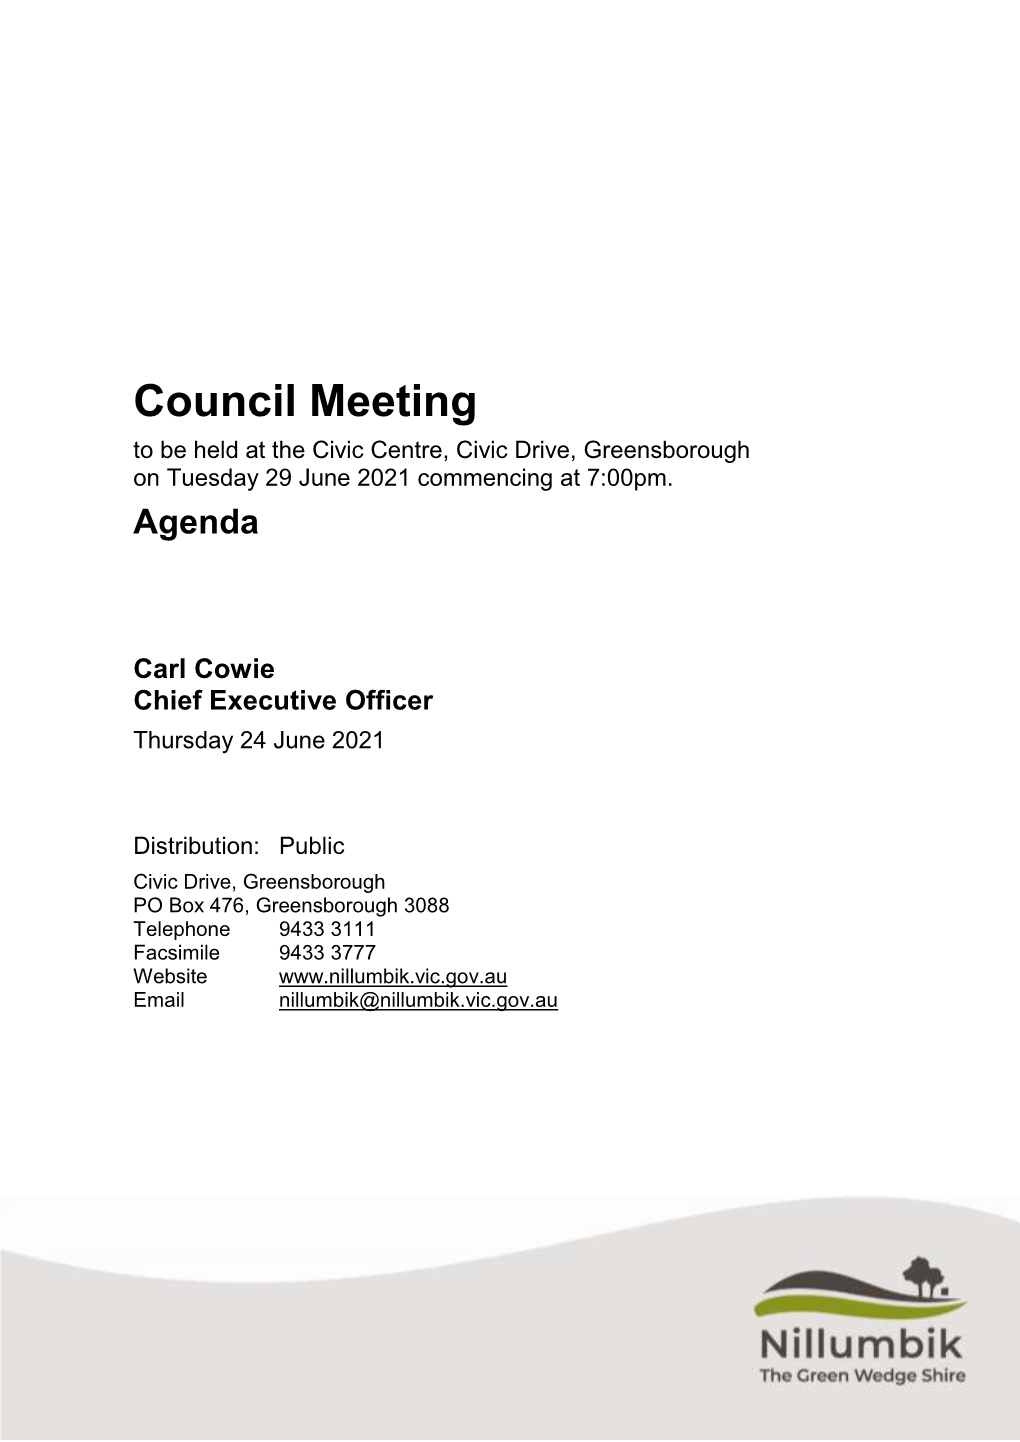 Agenda of Council Meeting